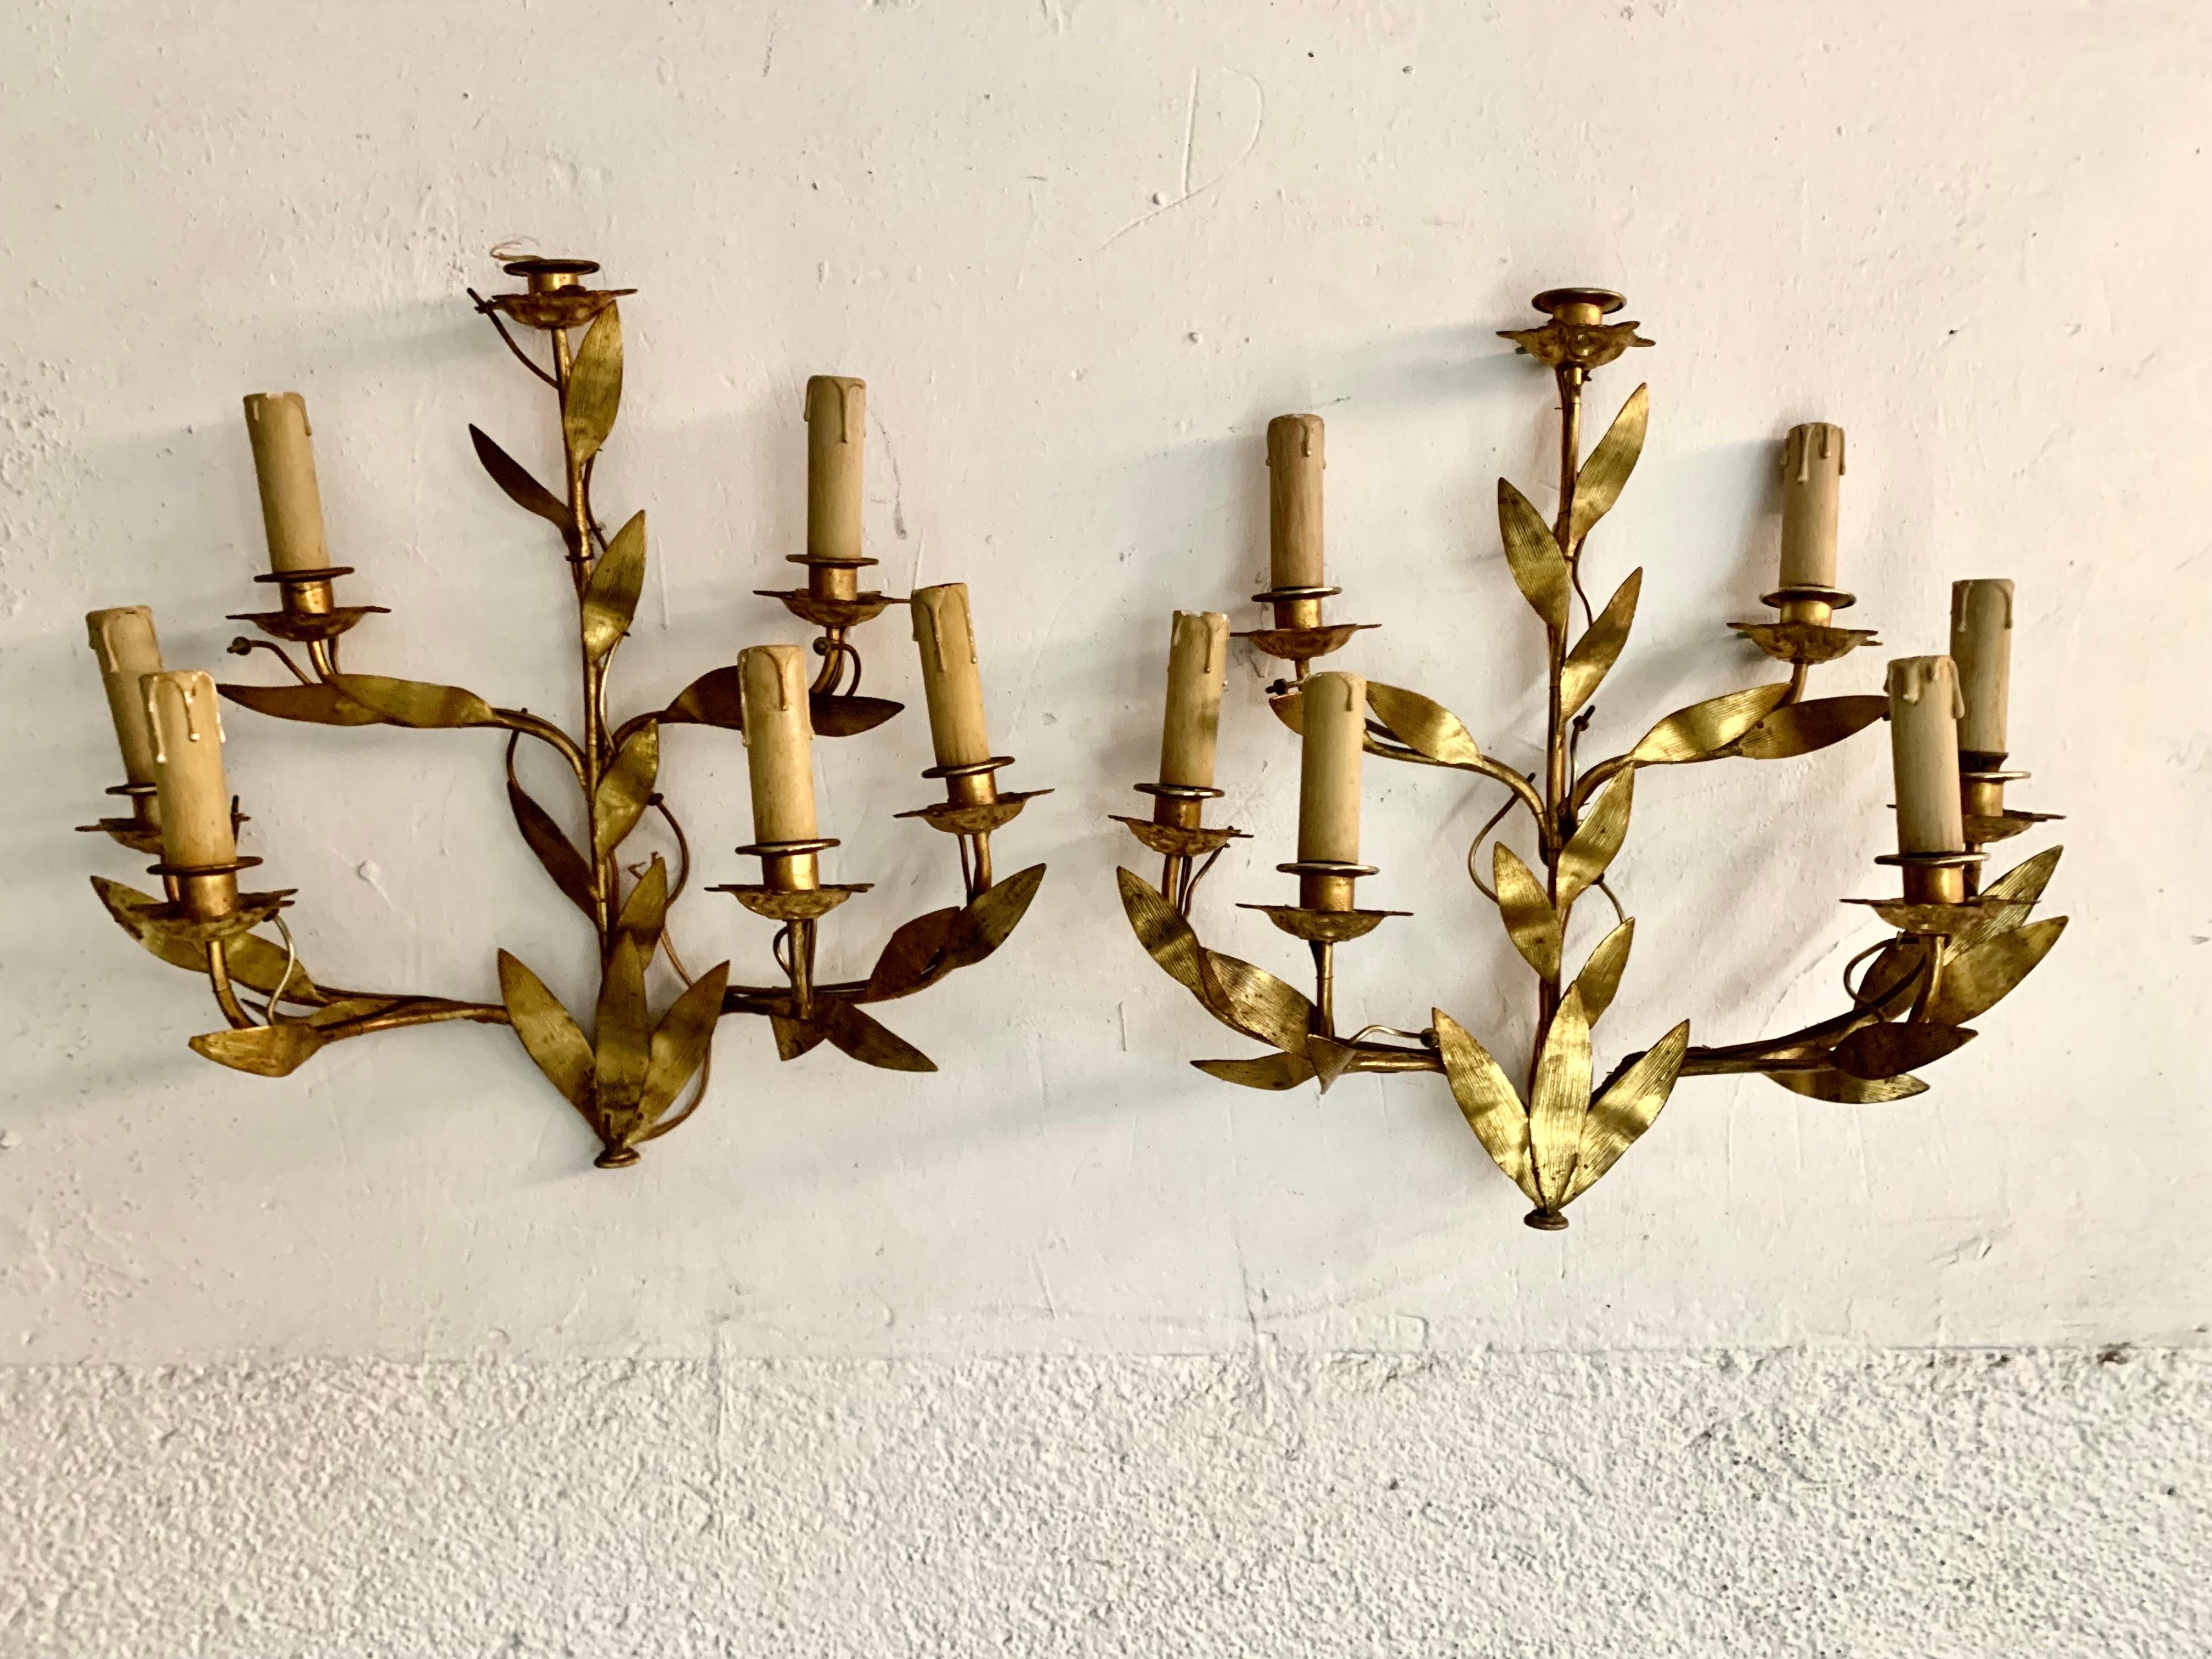 A pair of Spanish wall sconces, from the 1950s, are made with gilt metal imitating plant leaves, each sconces have six arms with a false candle,